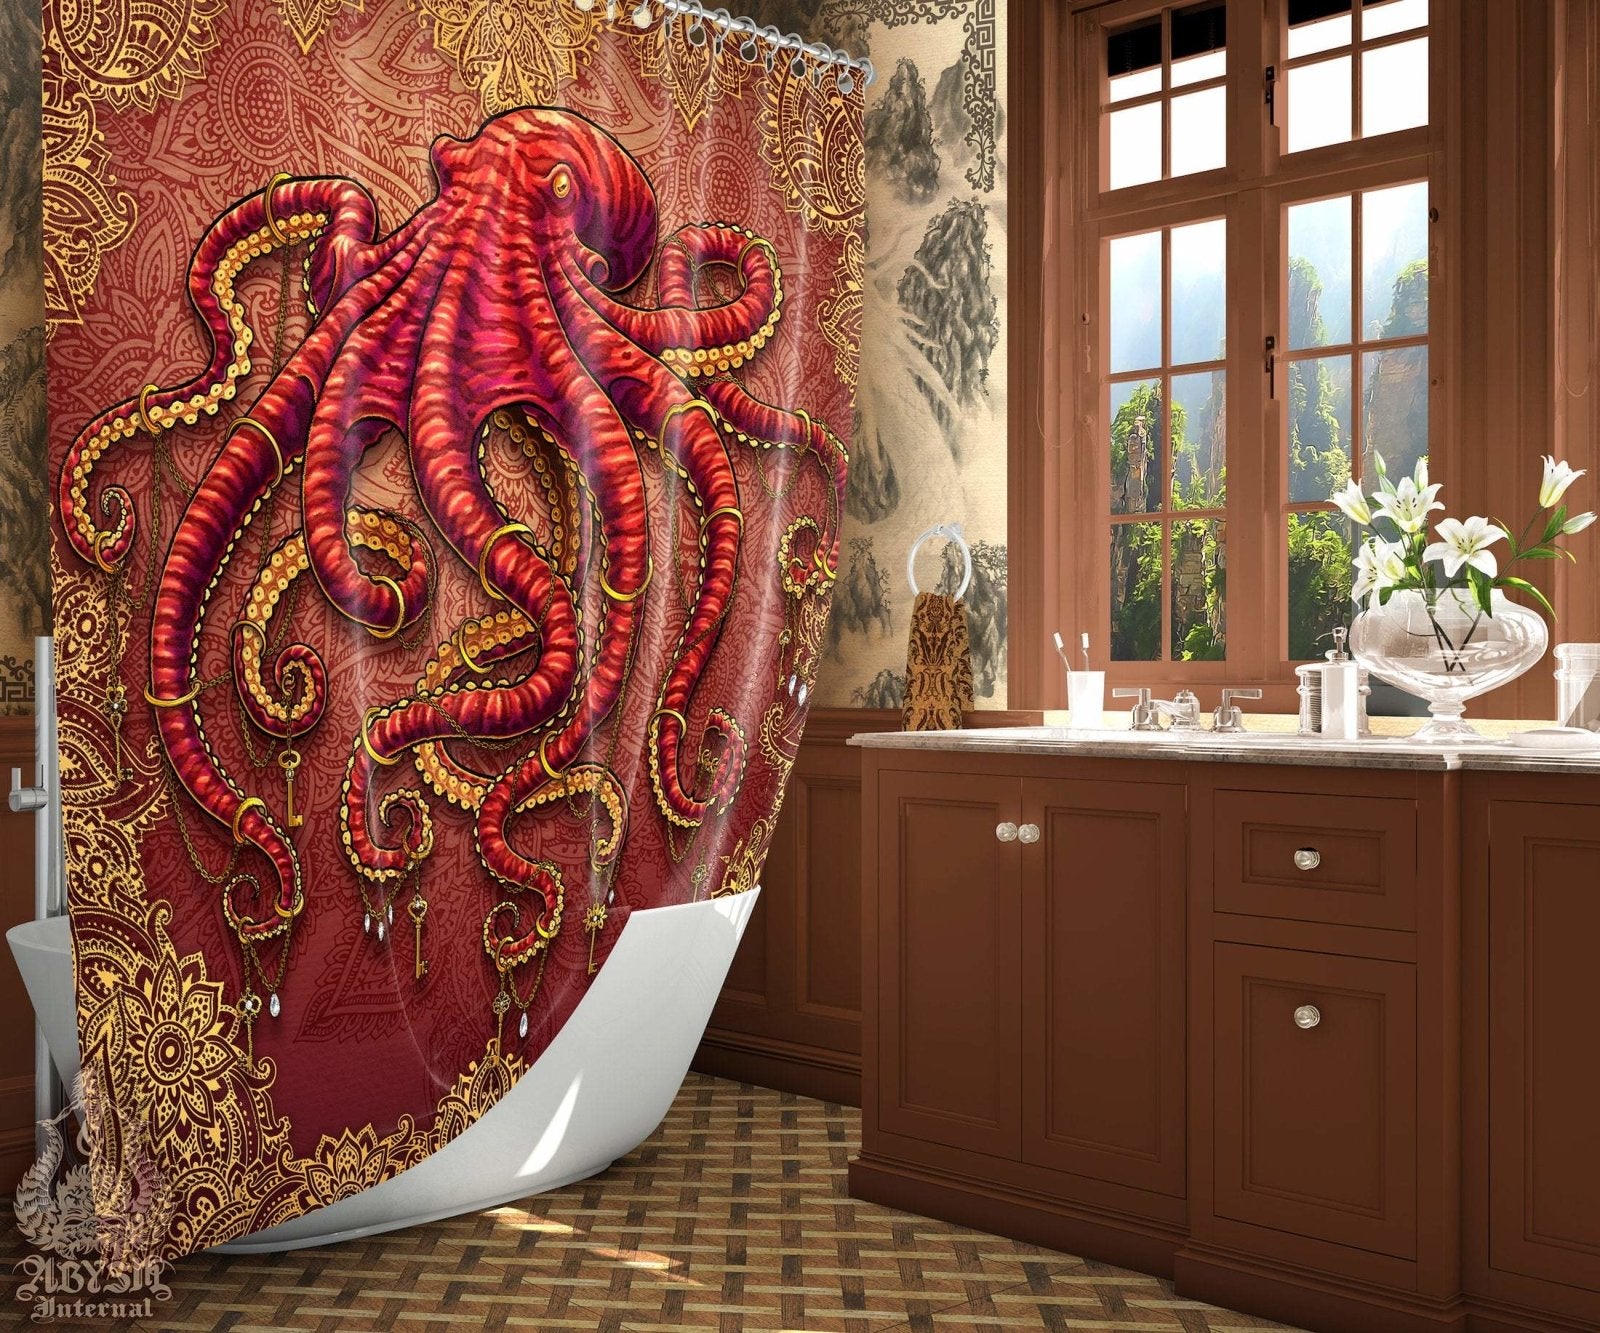 Boho Shower Curtain, Indie and Hippie Bathroom Decor, Eclectic and Funky Home - Octopus and Mandalas - Abysm Internal